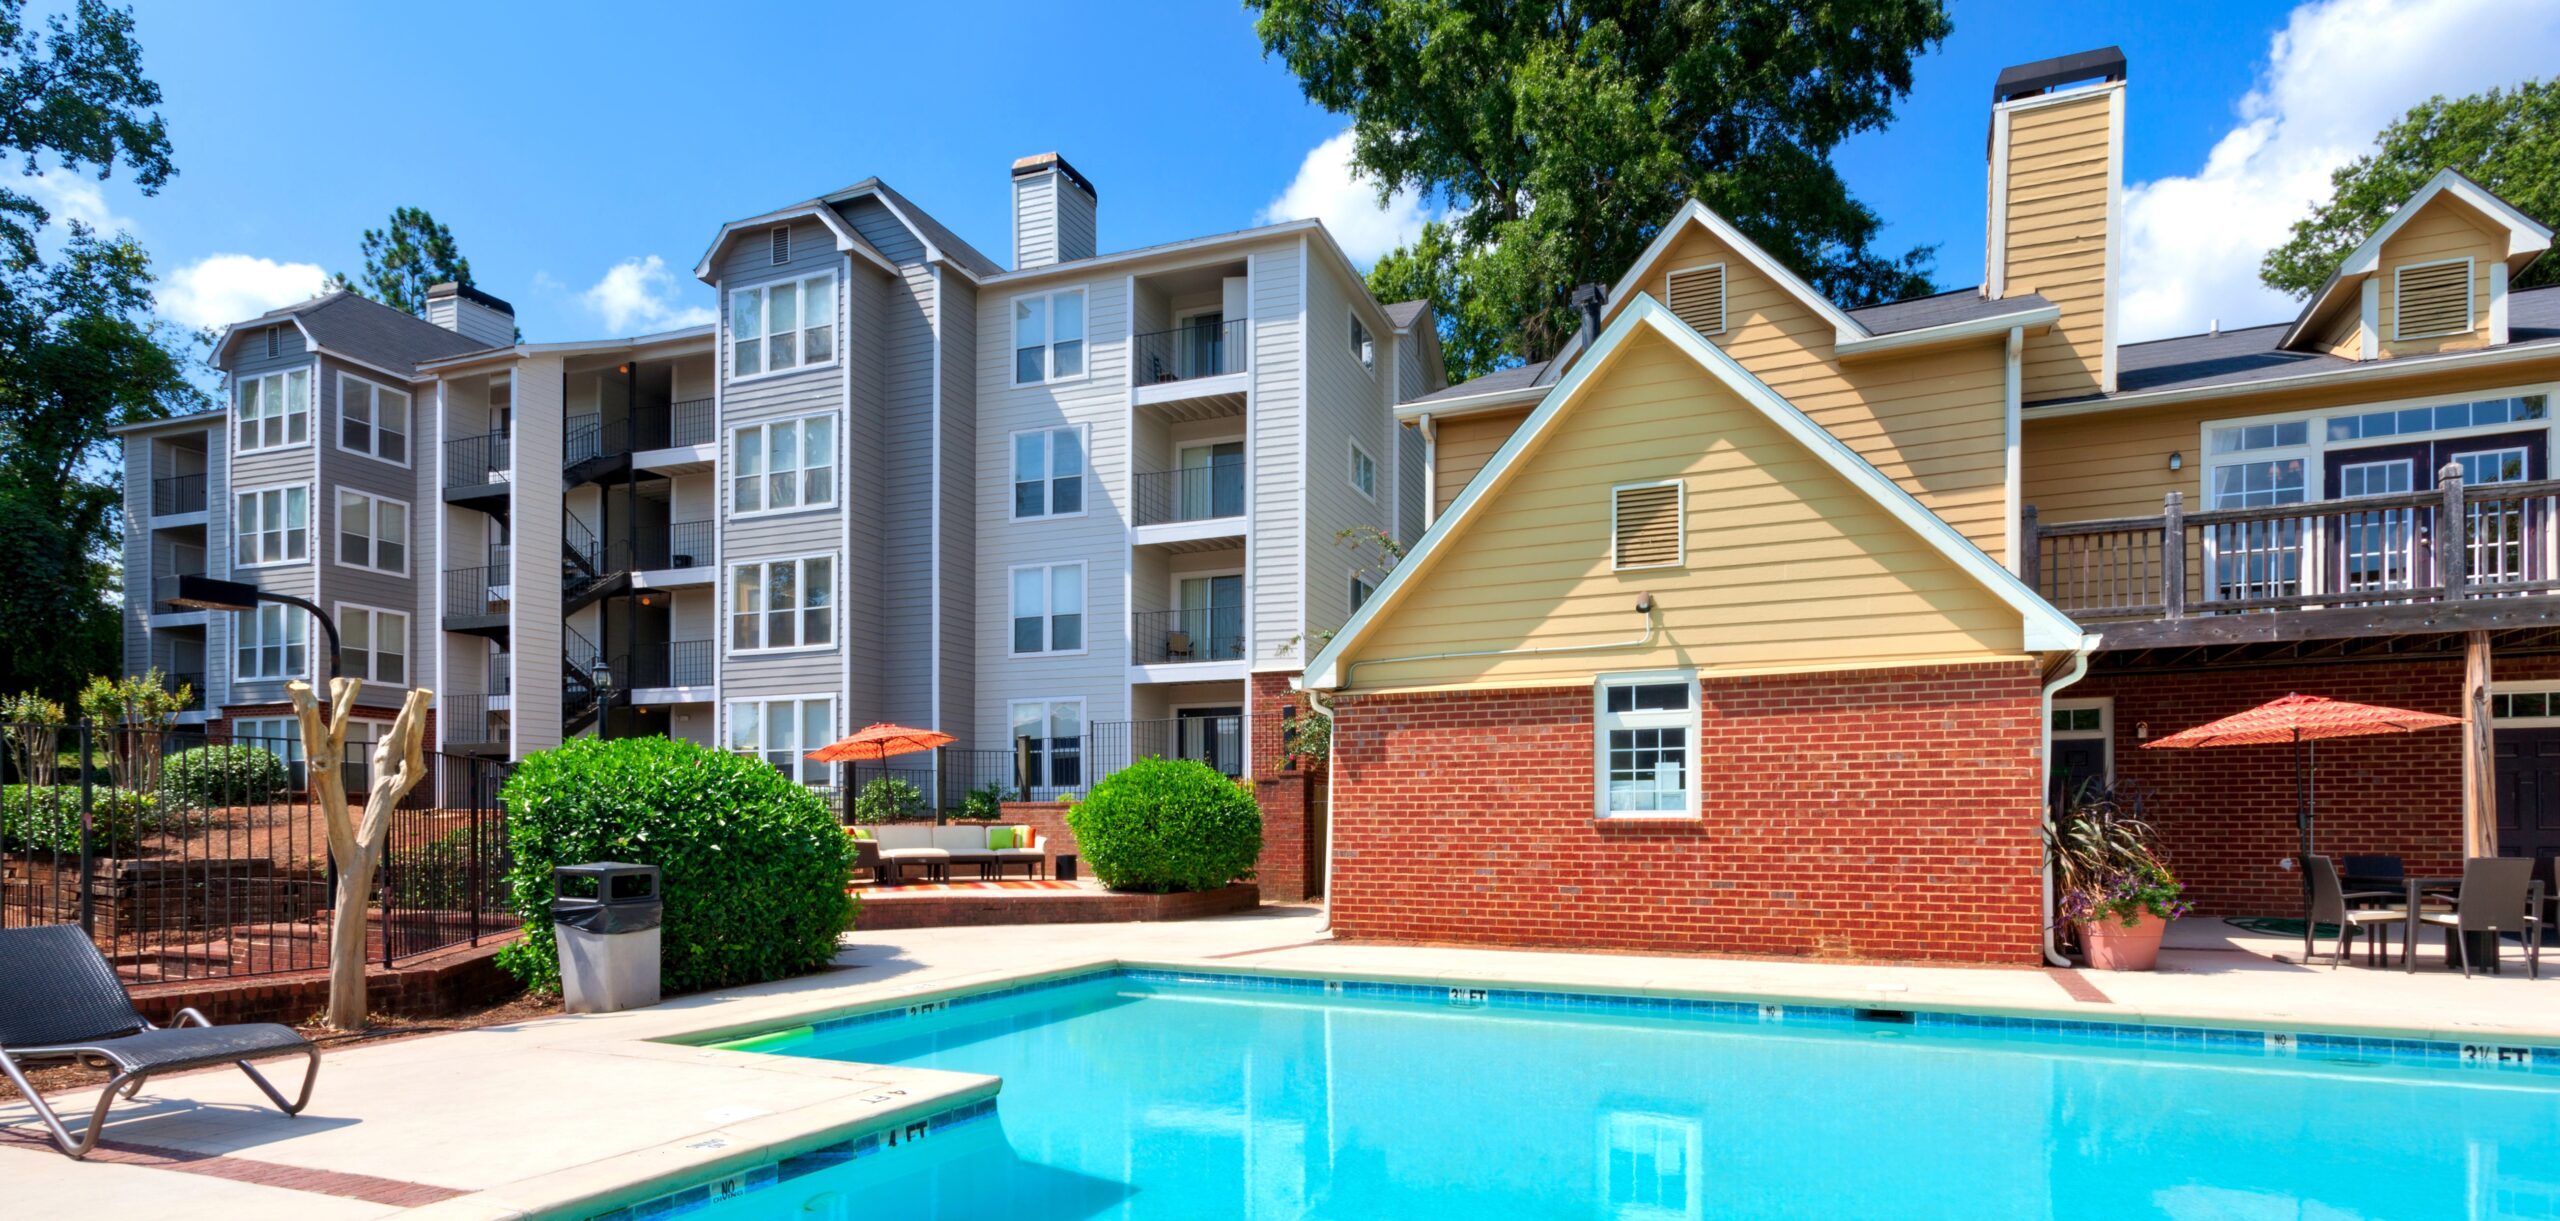 The Clarion is a 217-unit garden-style apartment community located in Atlanta, Georgia